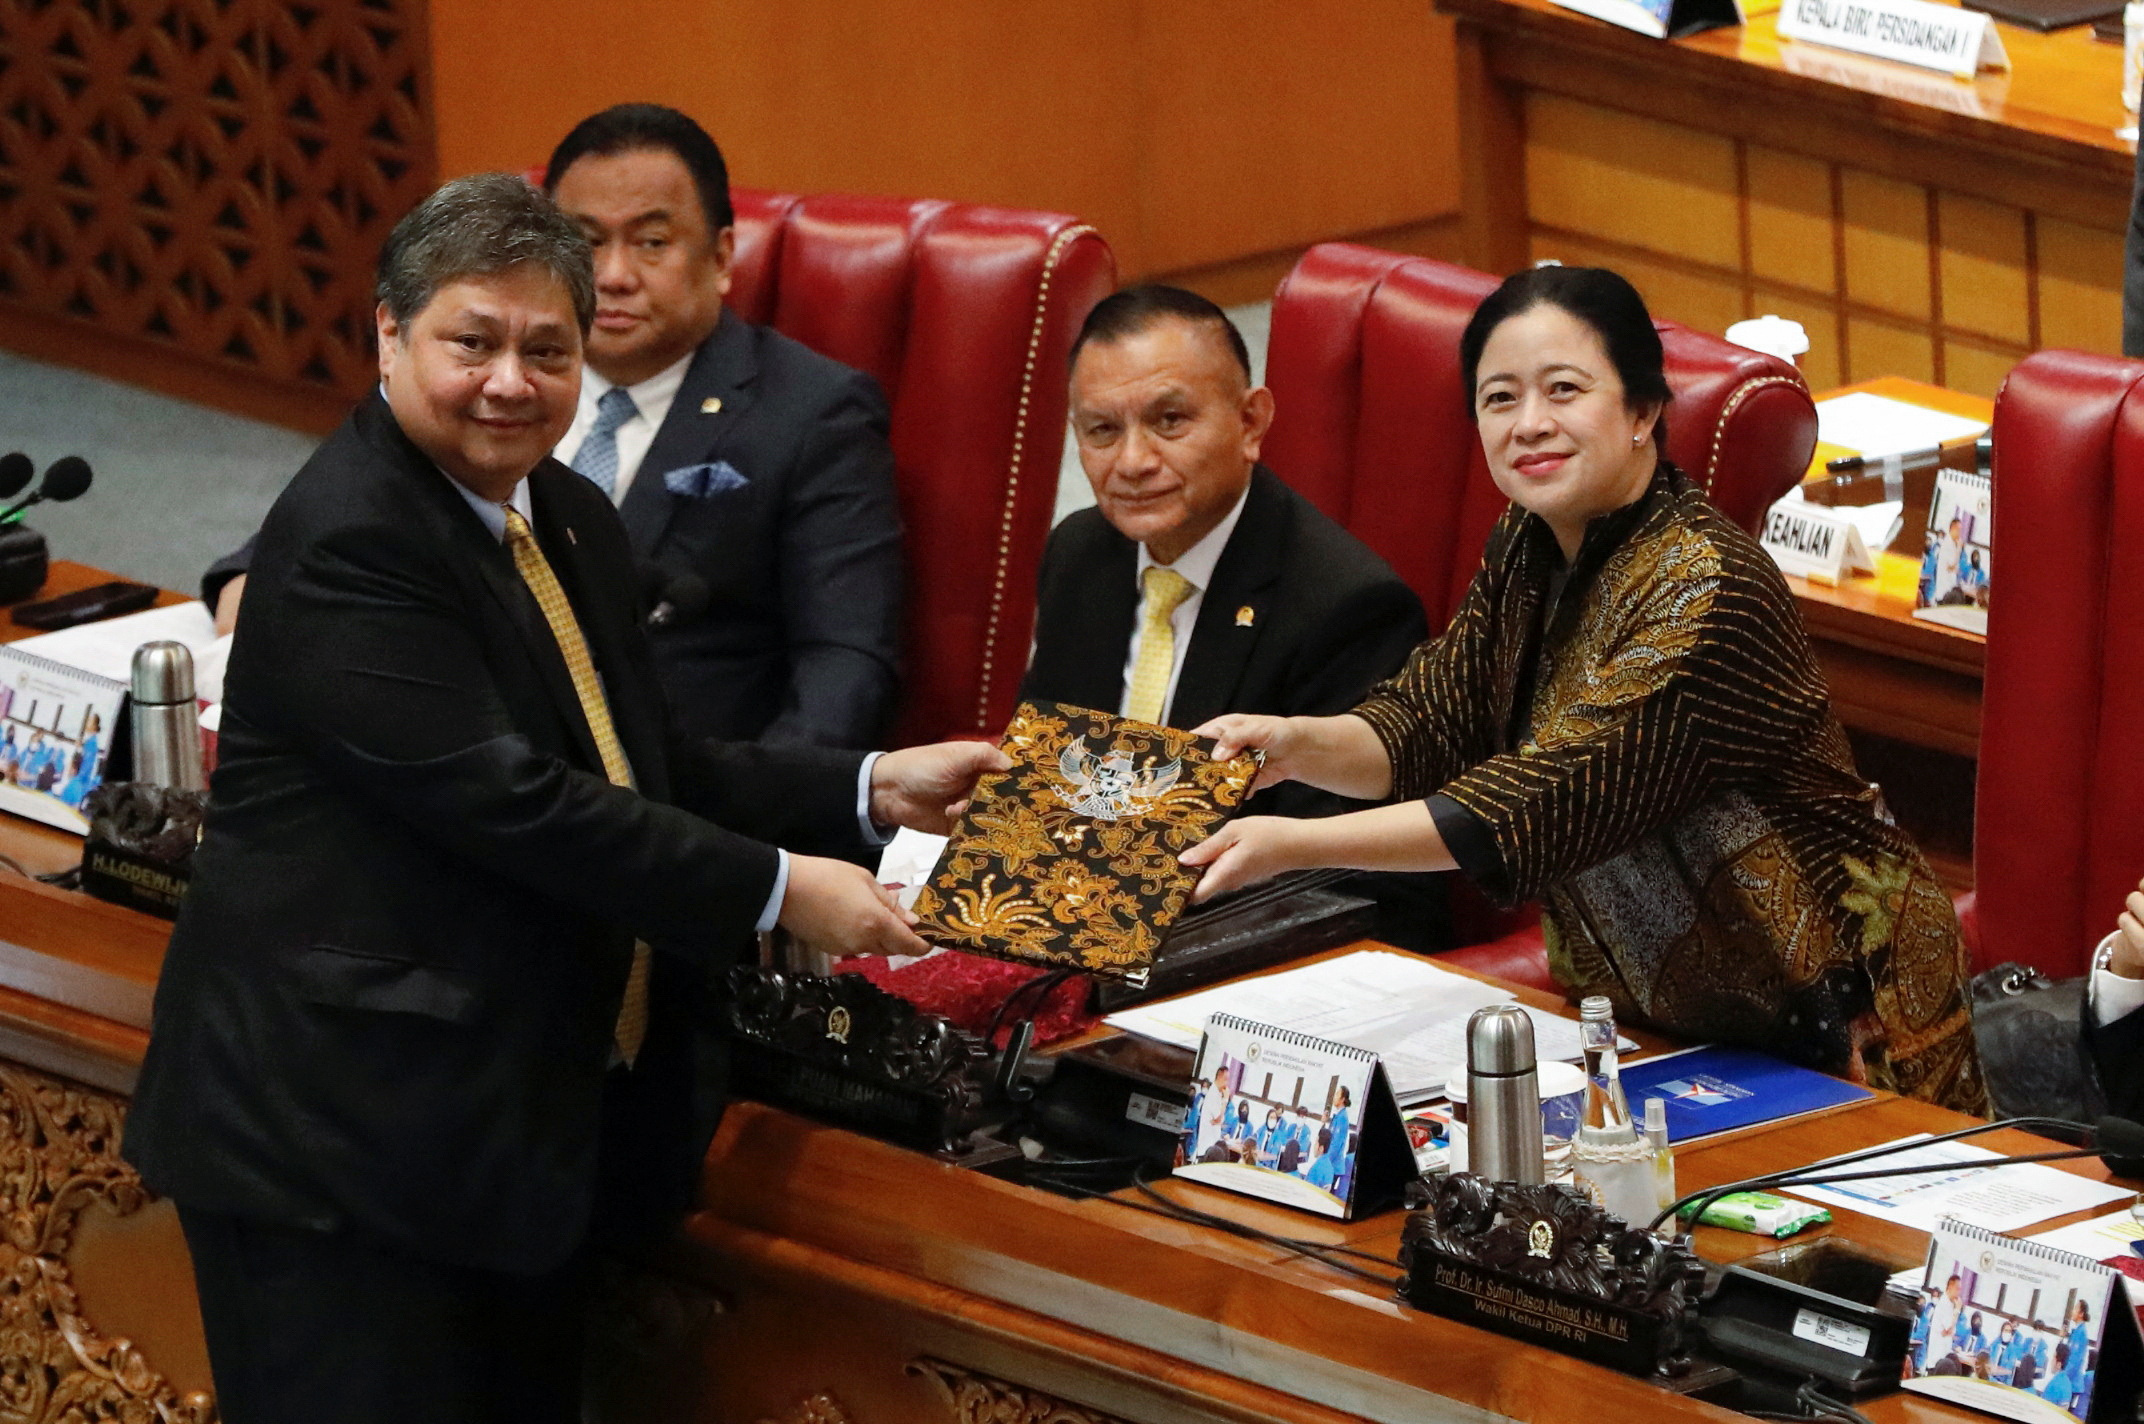 Indonesian Coordinating Minister for Economic Affairs, Airlangga Hartarto attends a photo session with House Speaker Puan Maharani during the parliamentary plenary meeting in Jakarta